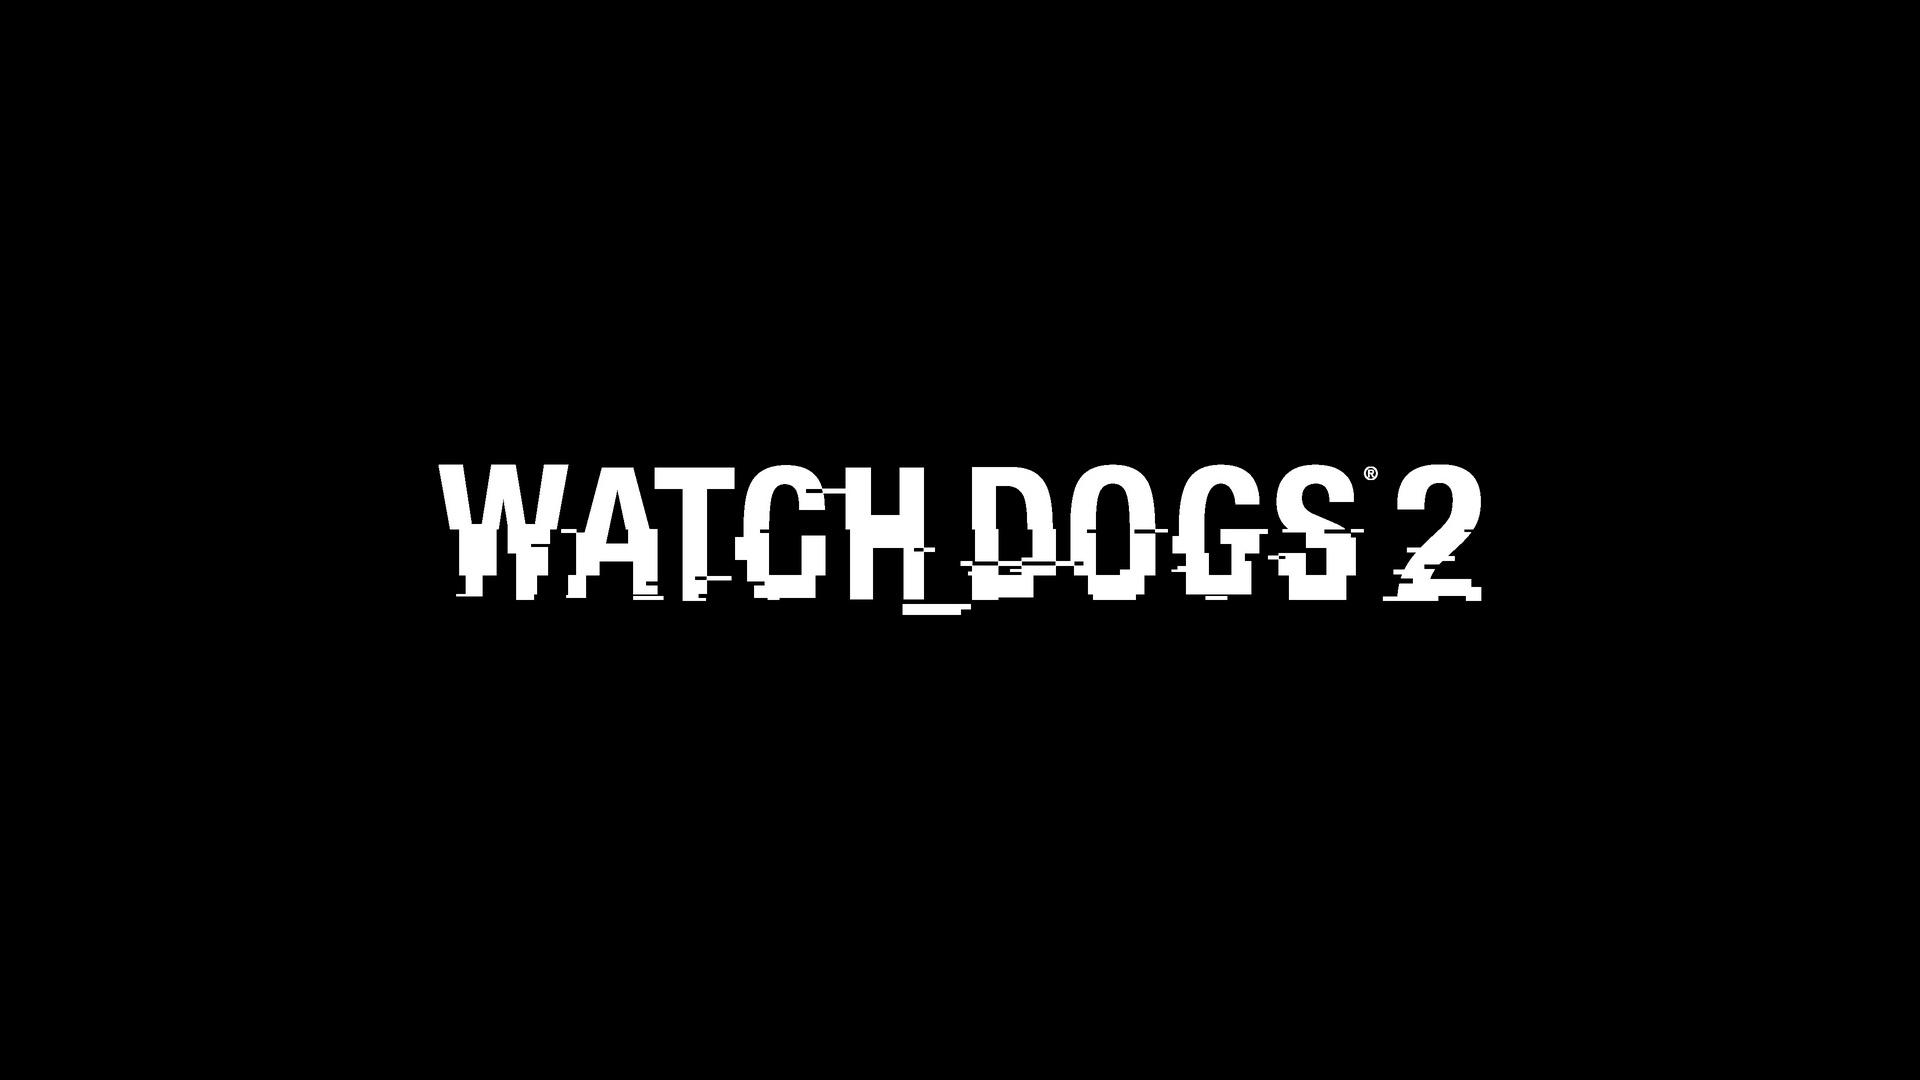 Watch Dogs 2 Wallpaper, Picture, Image